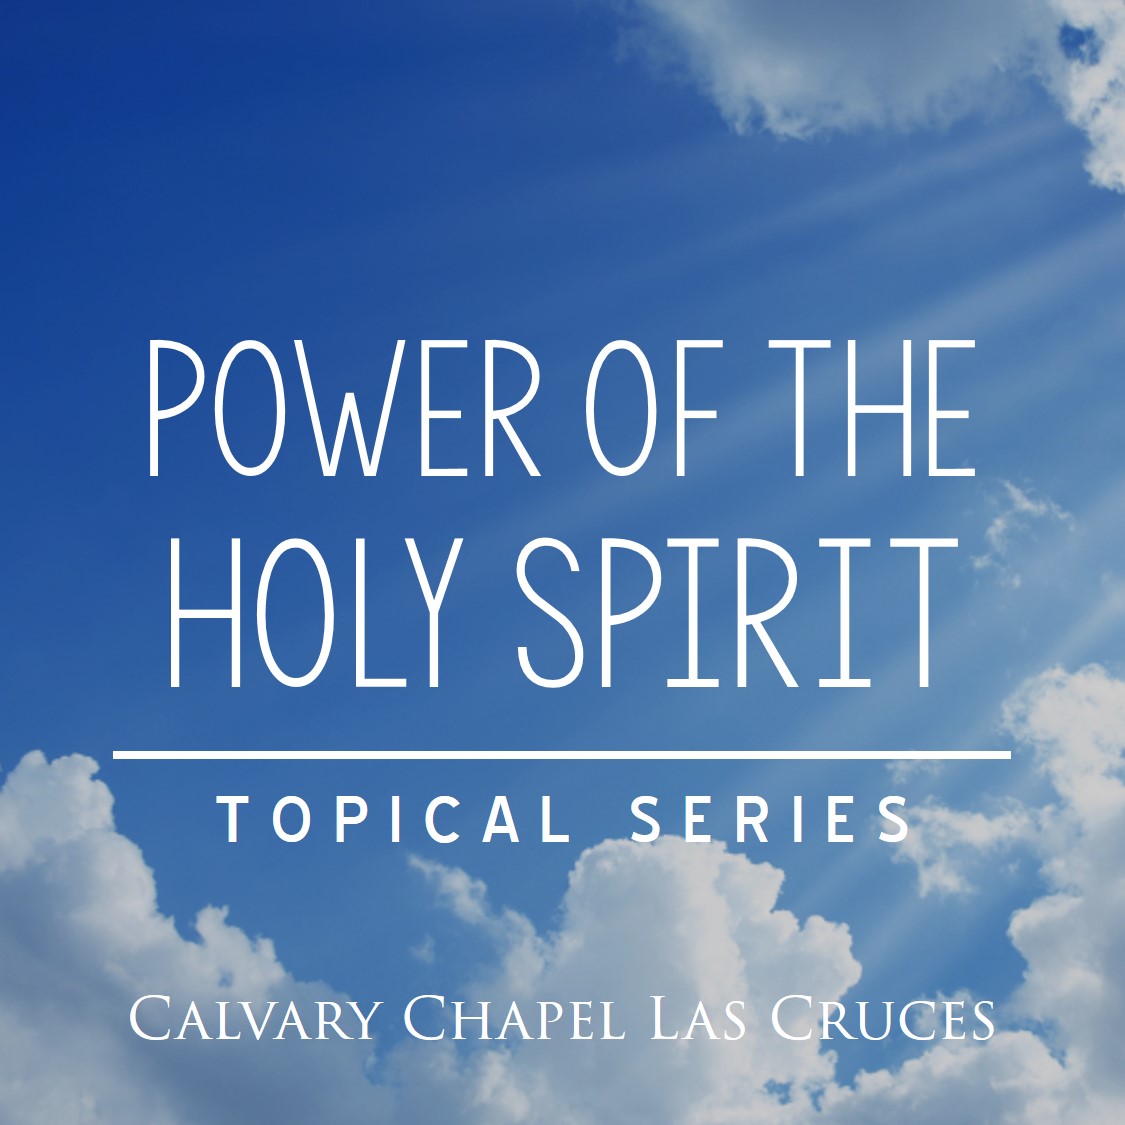 The Power of the Holy Spirit, Part 14